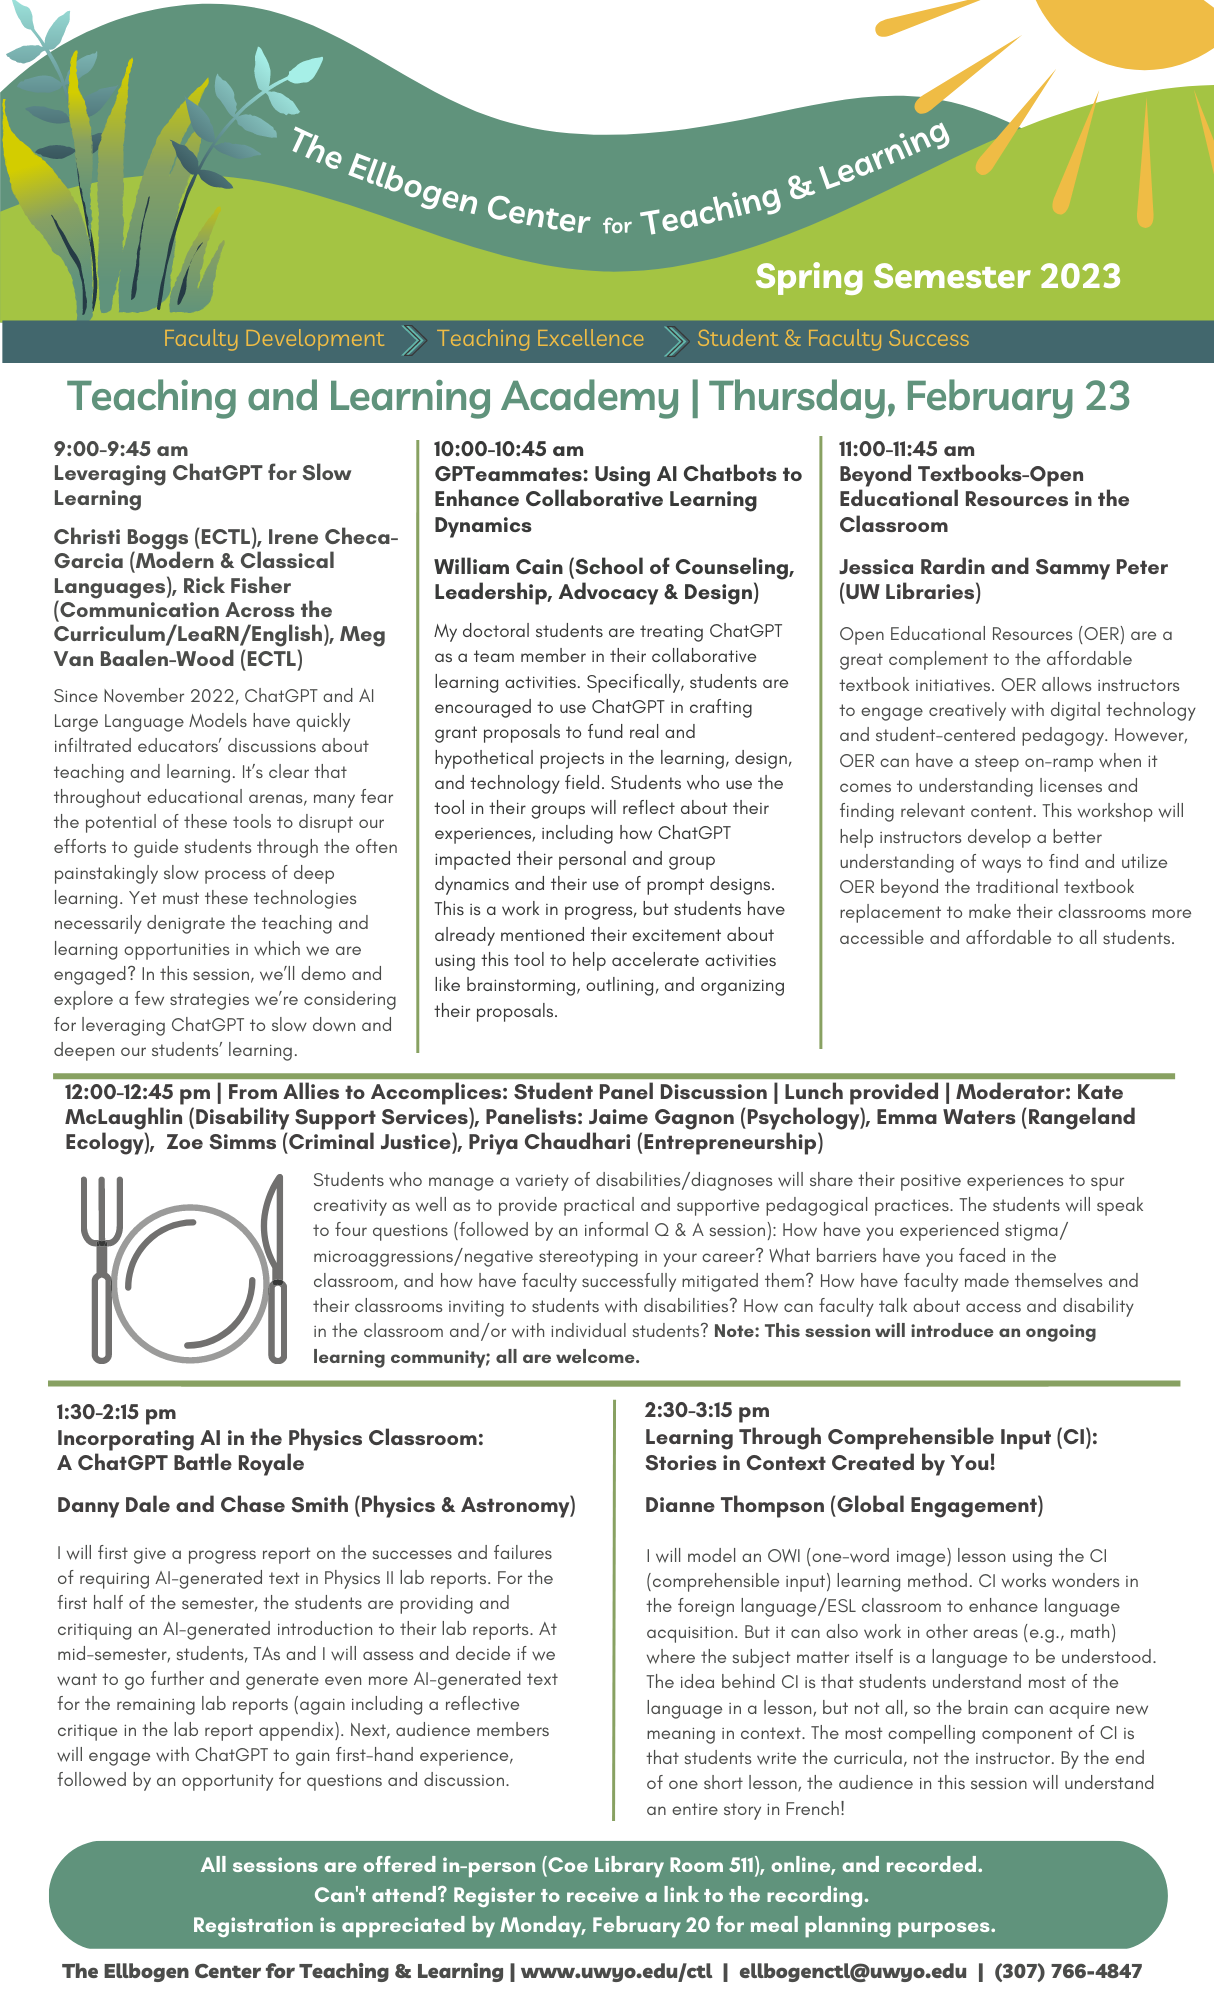 Flyer for February 23 Teaching and Learning Academy